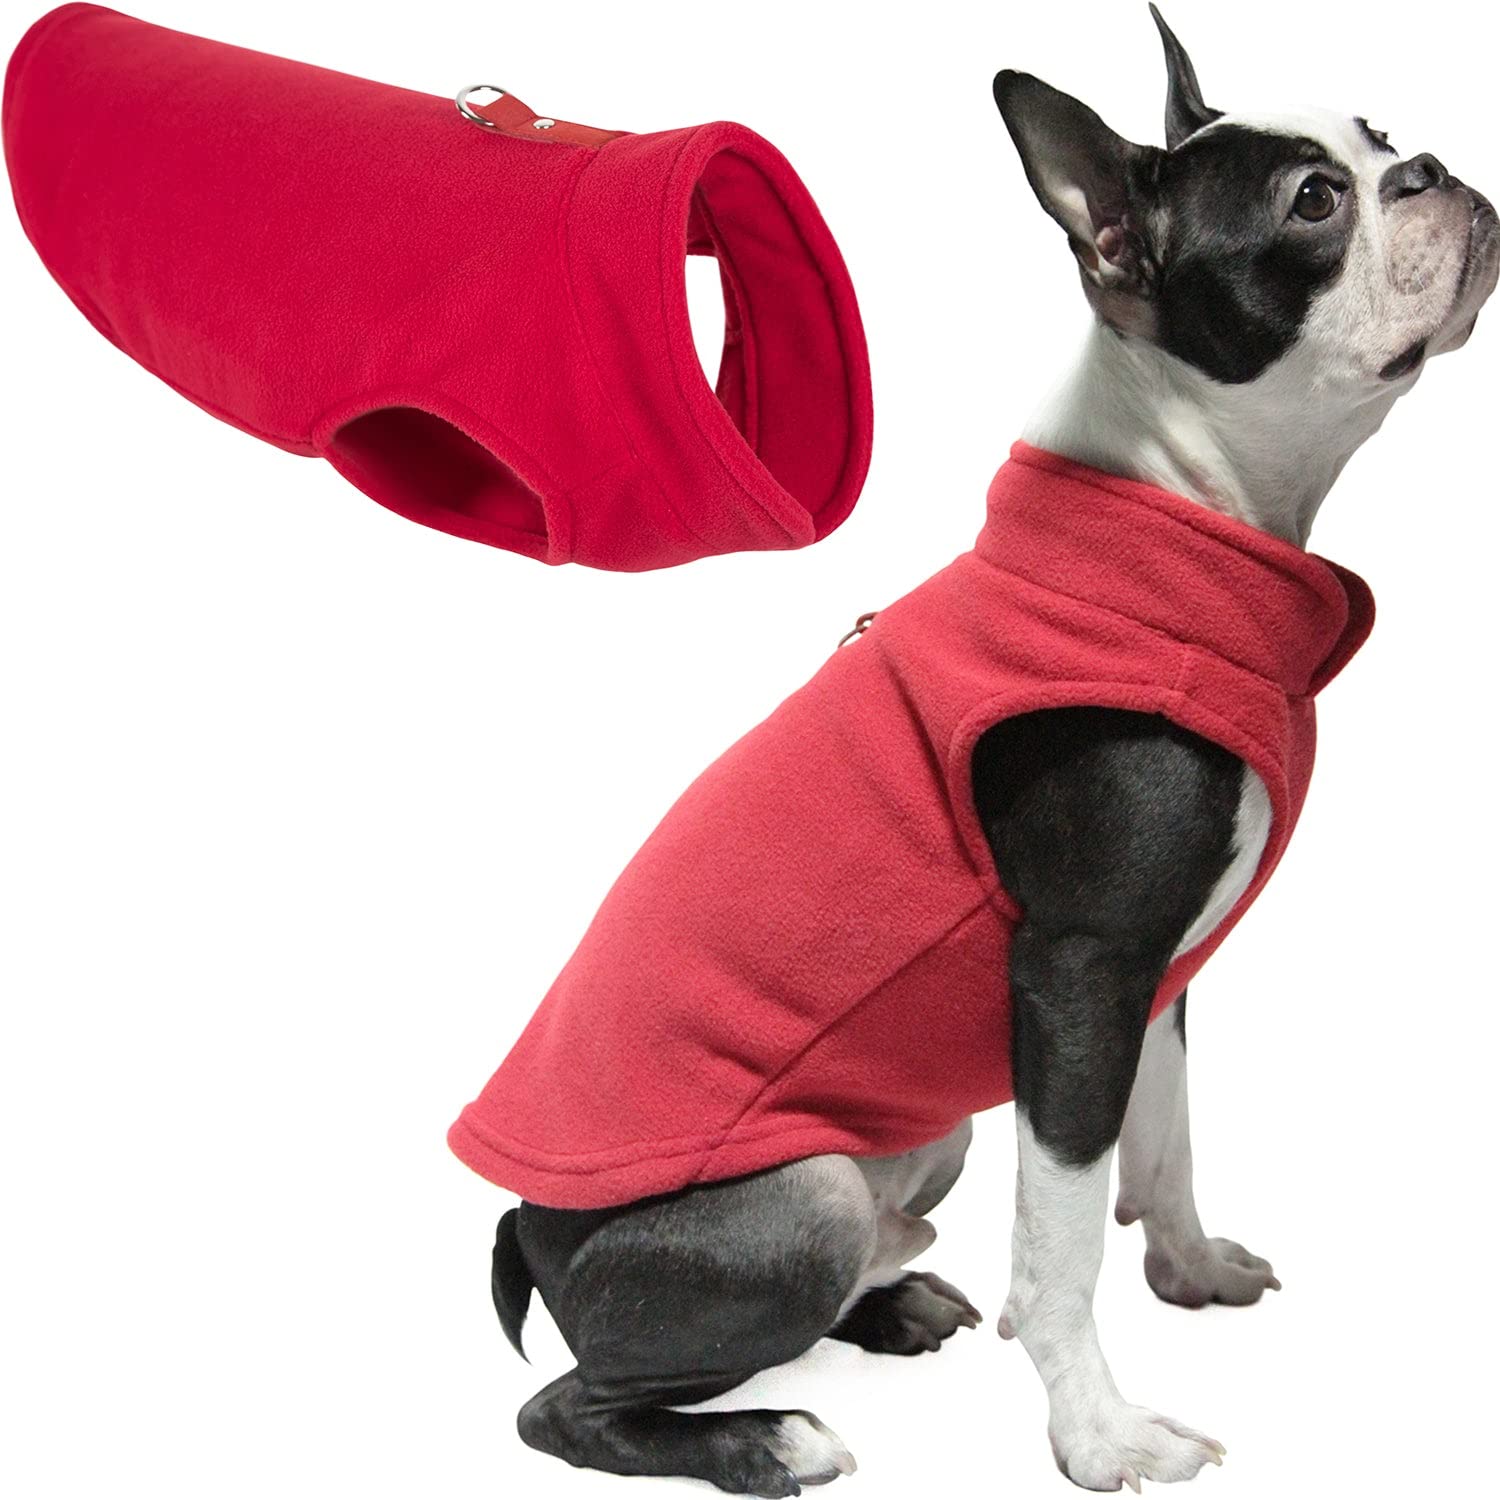 gooby Fleece Vest Dog Sweater - Red, Medium - Warm Pullover Fleece Dog Jacket with O-Ring Leash - Winter Small Dog Sweater coat 